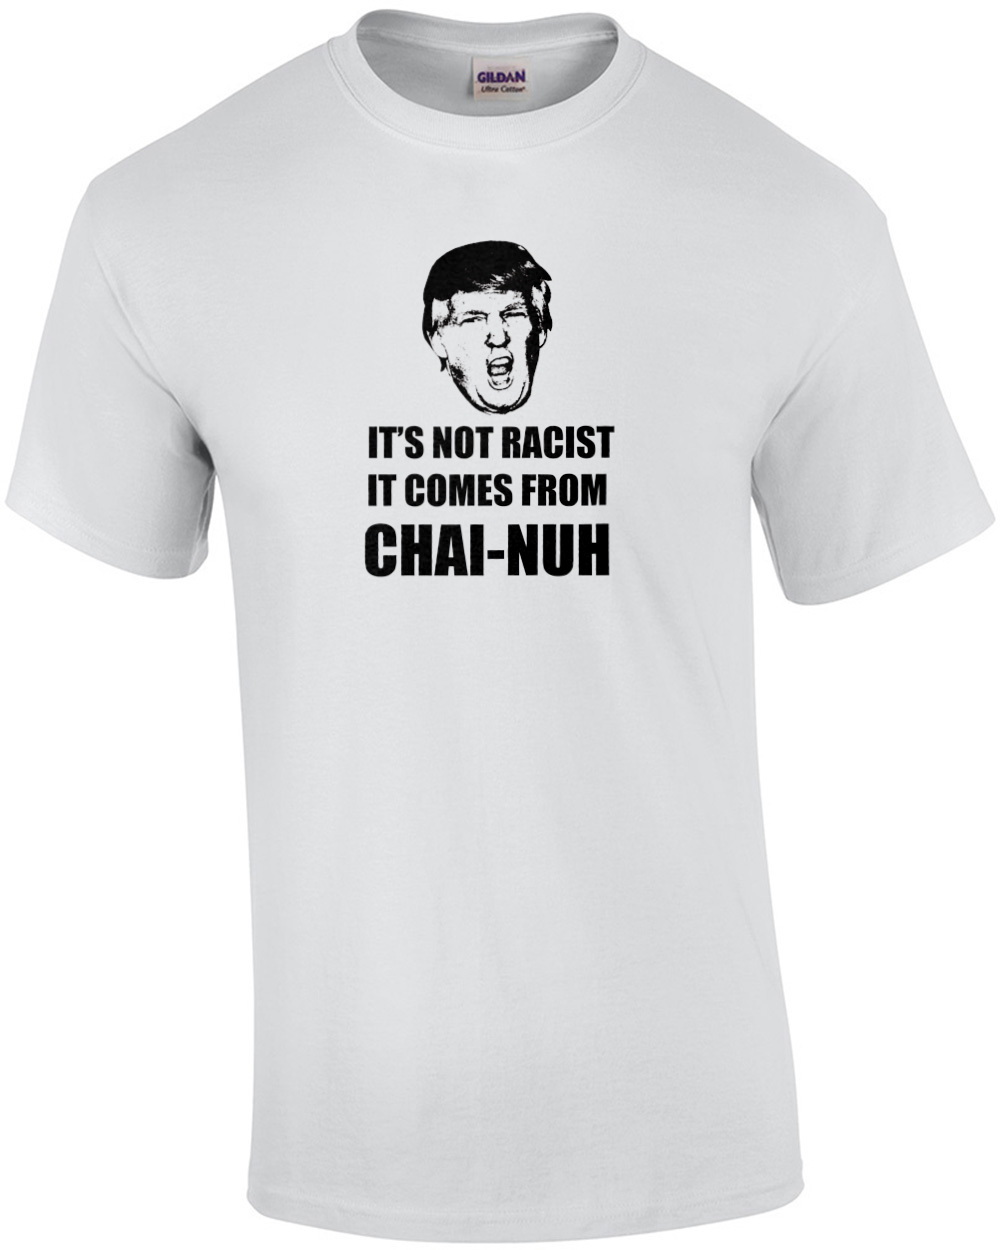 It's Racist, It Comes From Chai-nuh Funny Trump China Shirt | eBay